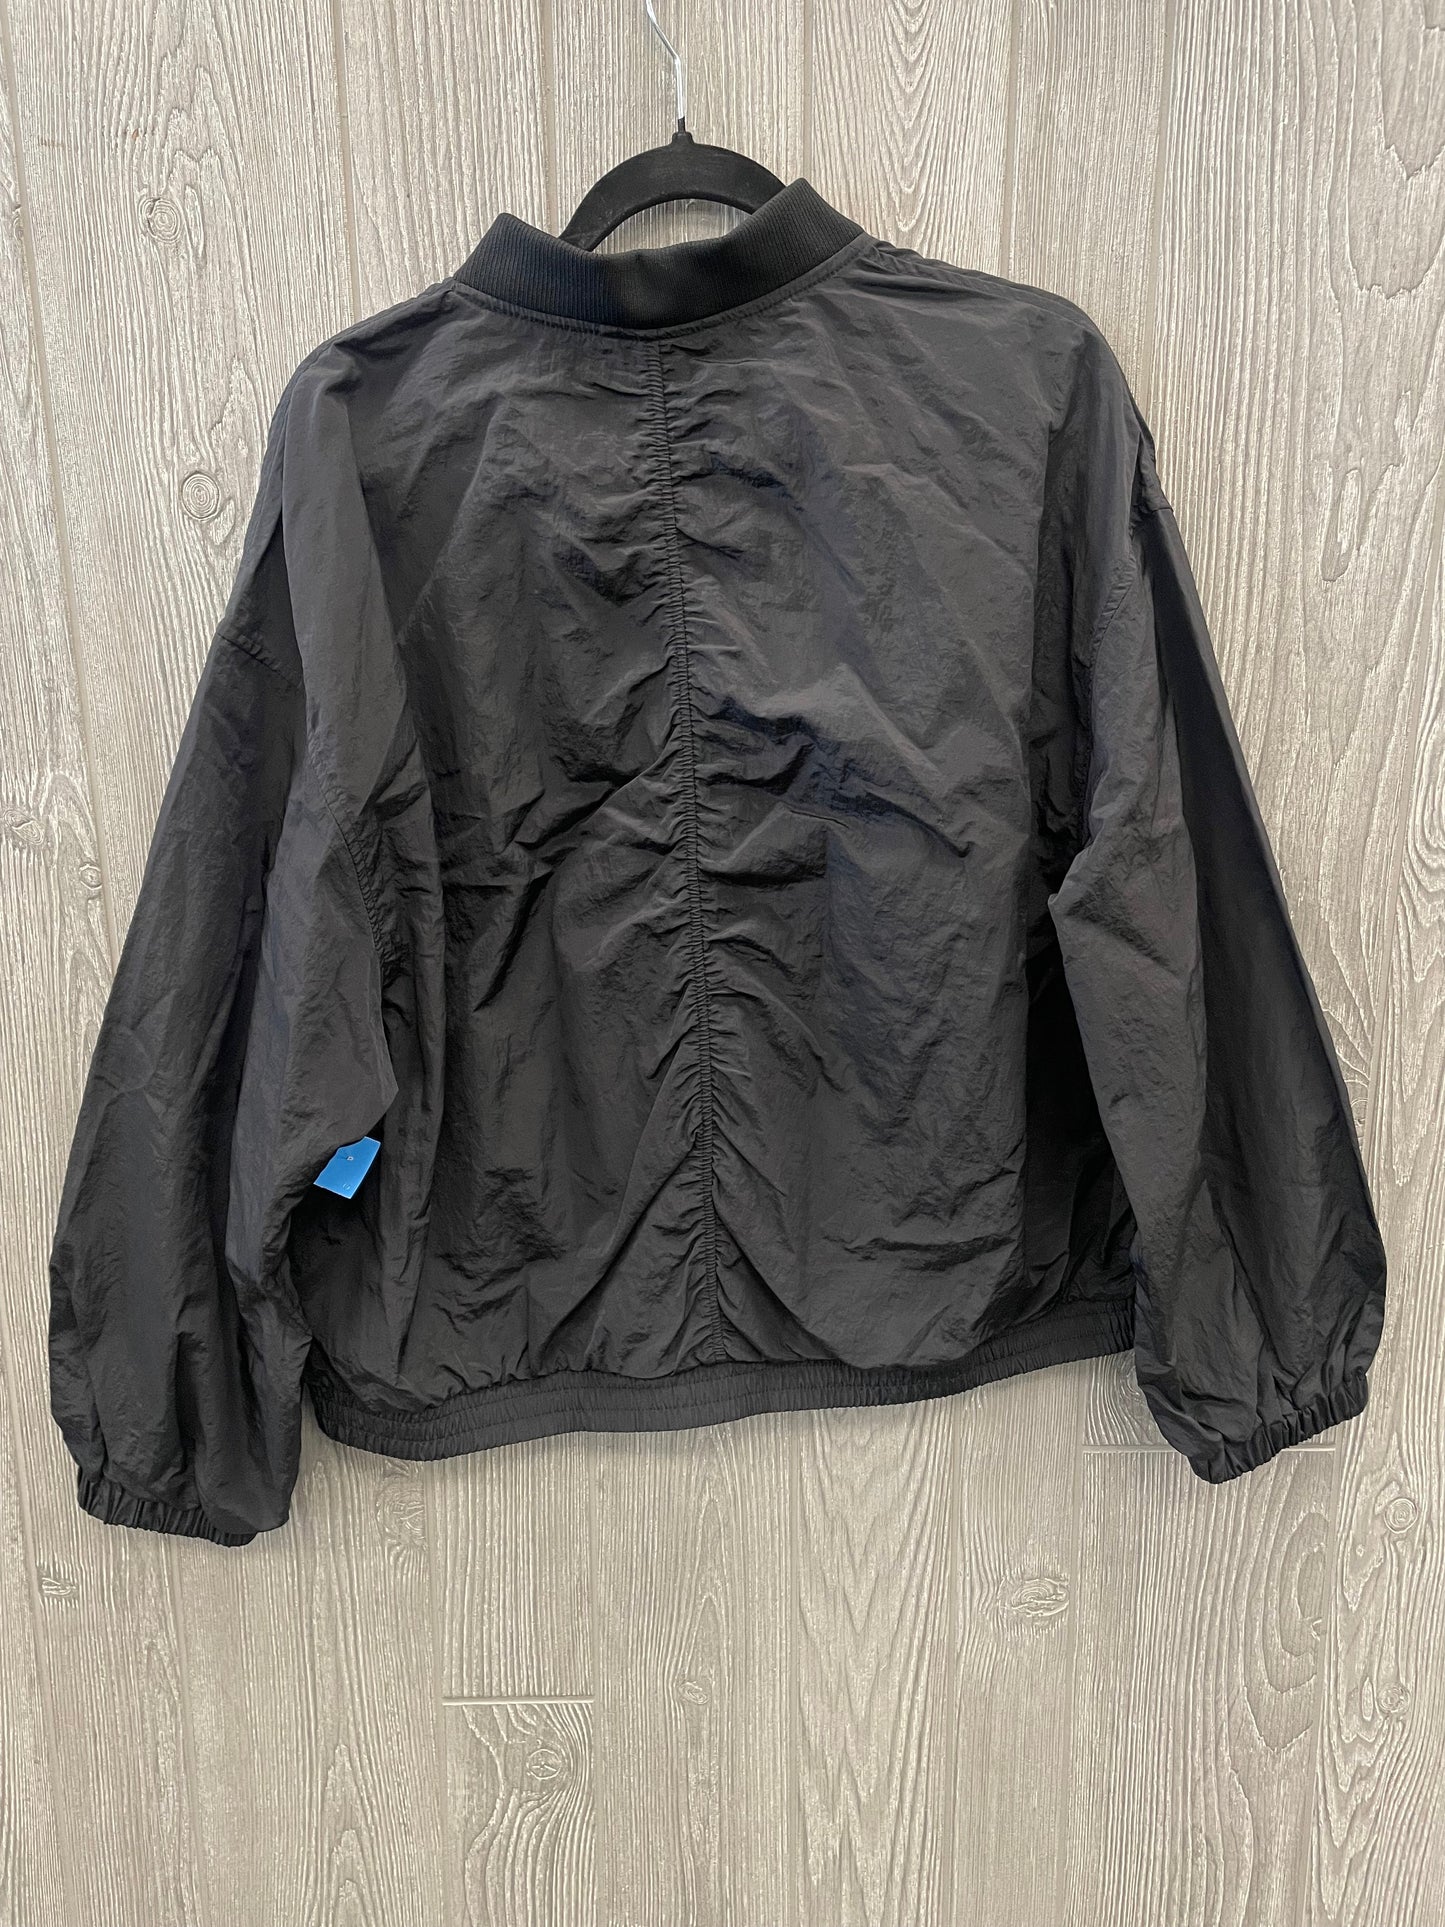 Athletic Jacket By Old Navy  Size: Xl